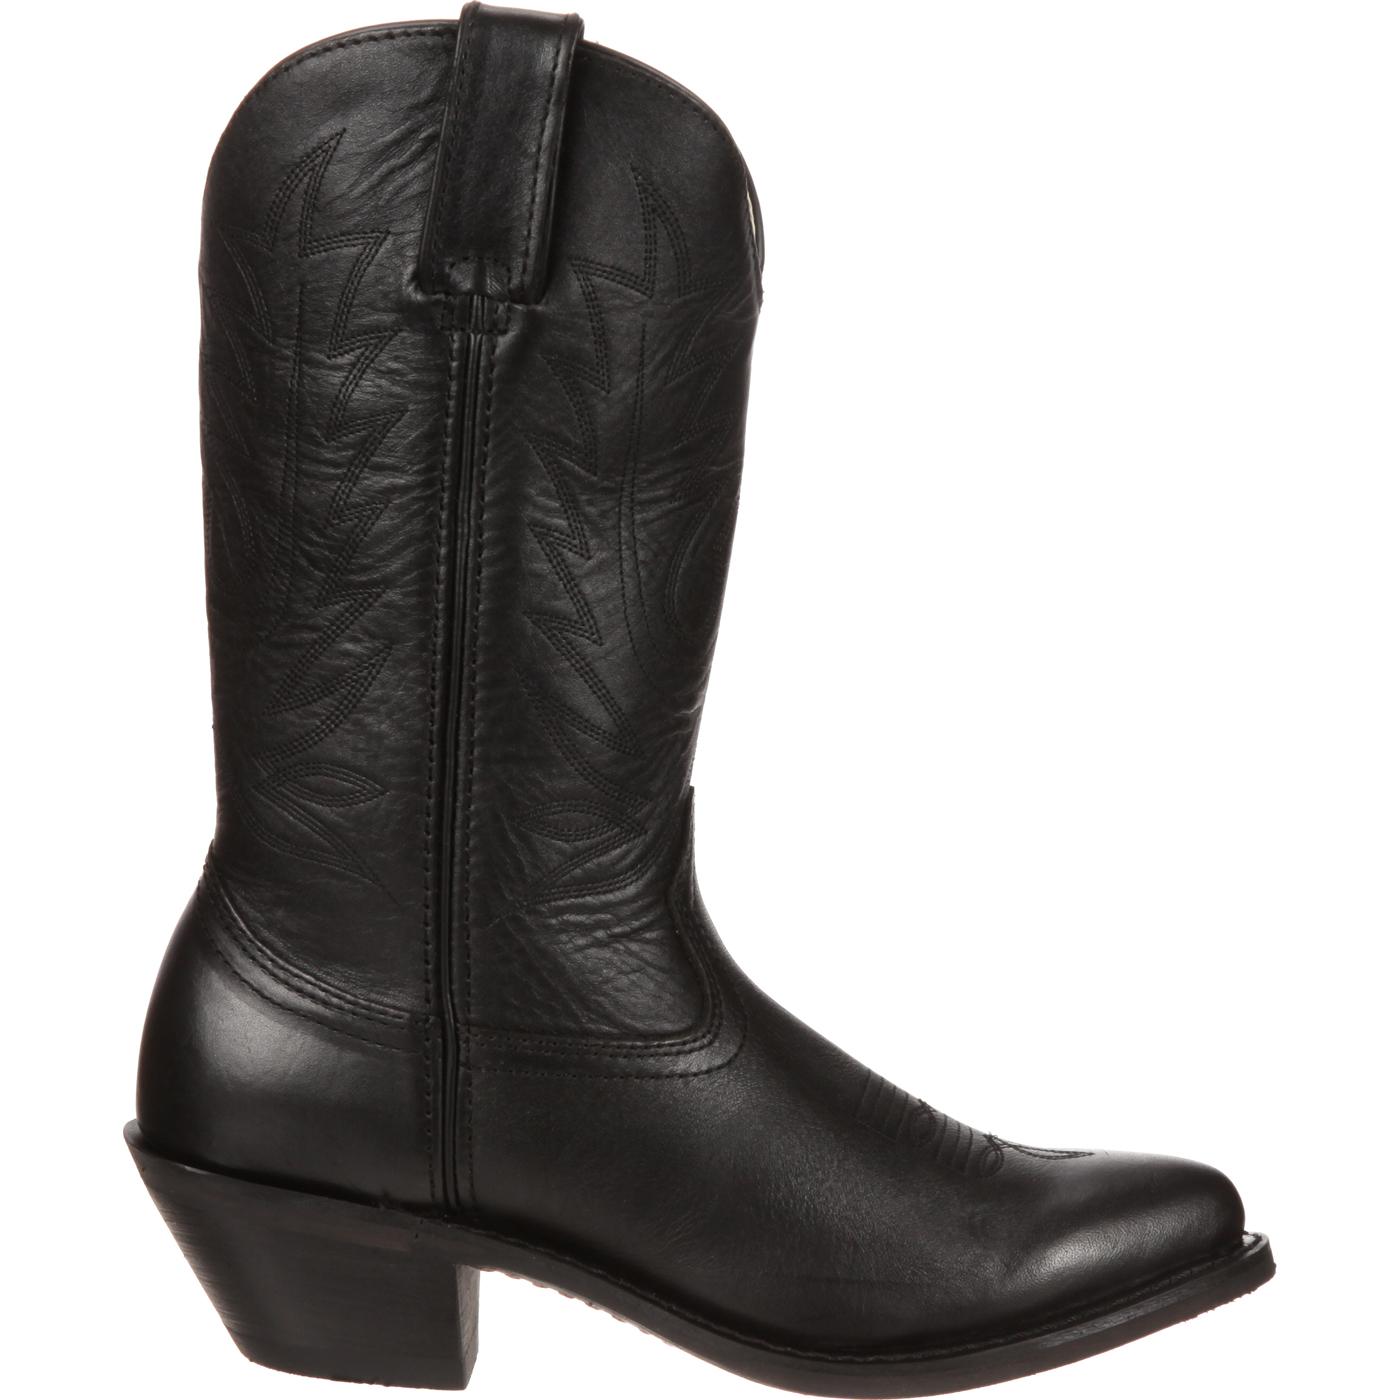 Durango: Women's Black Leather Western Boots, style #RD4100